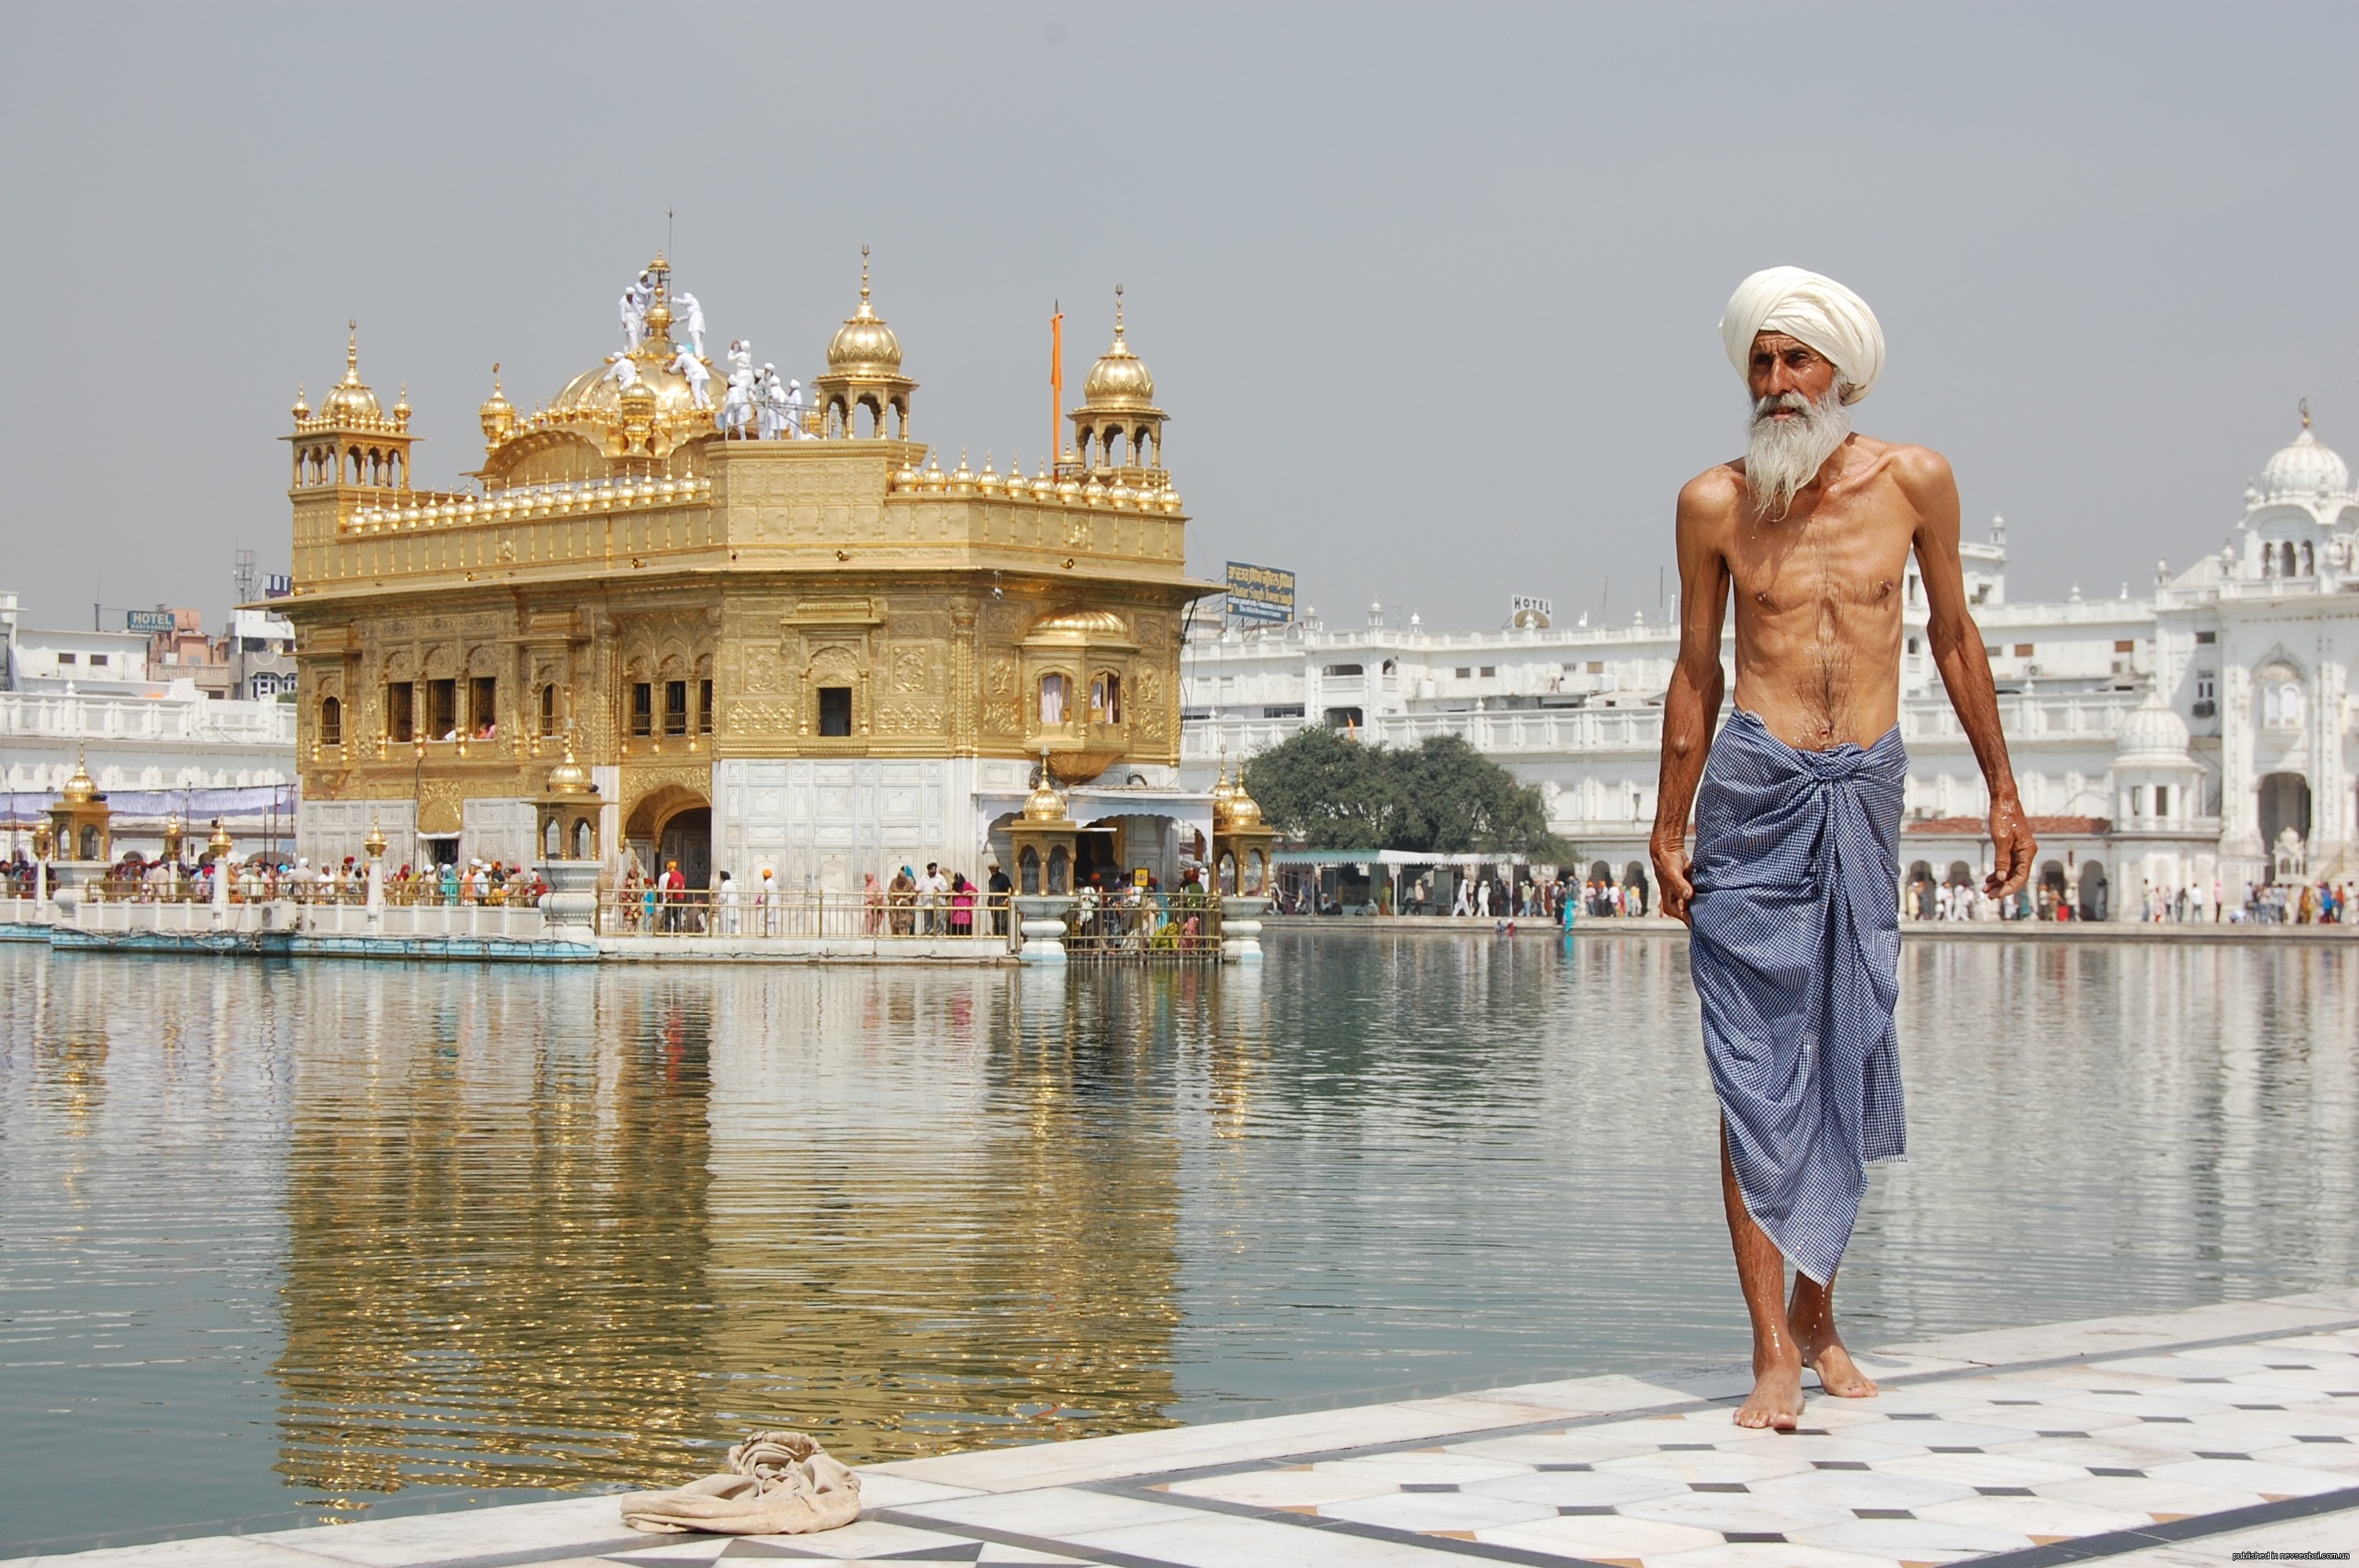 Men Old People India Shirtless Water Architecture Beards Barefoot People Crowds Gold Temple 3008x2000